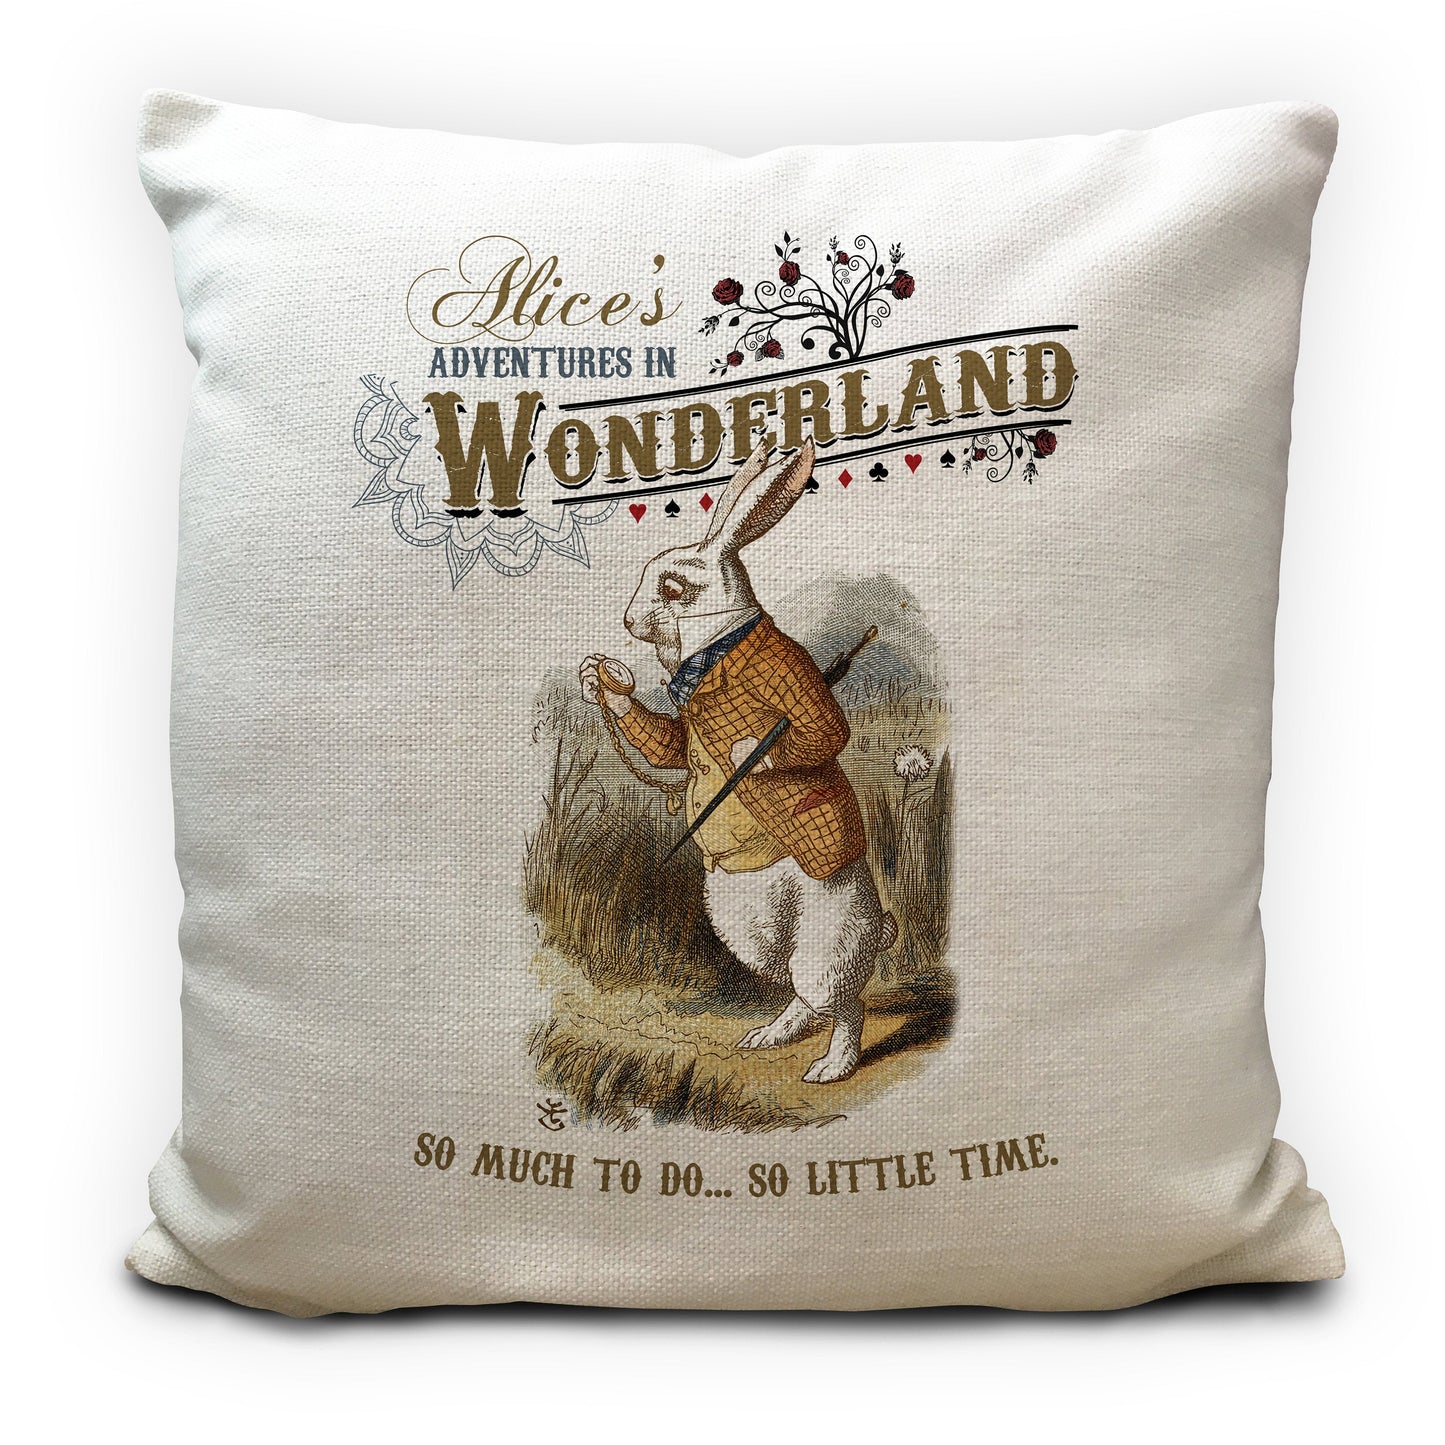 Alice in wonderland cushion cover with white rabbit traditional illustration and so little time quote